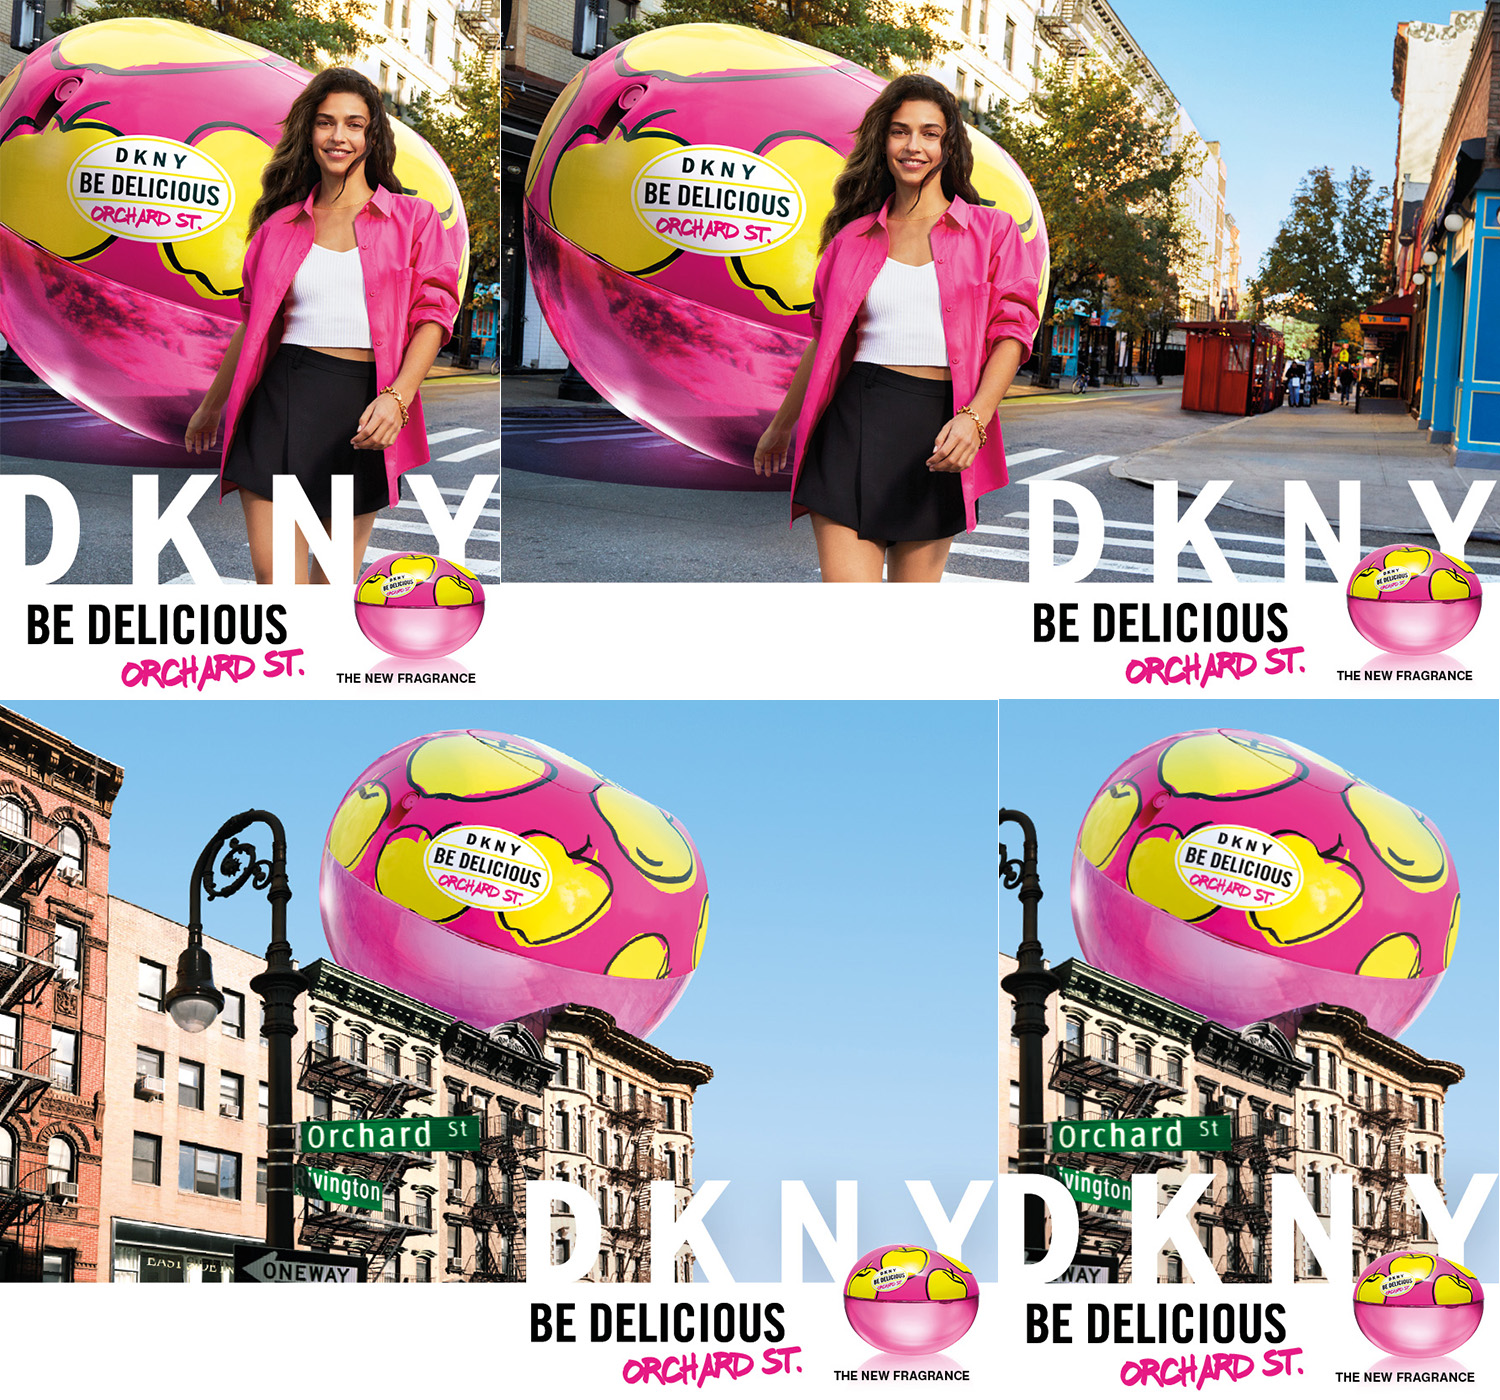 DKNY Be Delicious Orchard St. Fragrance Ads